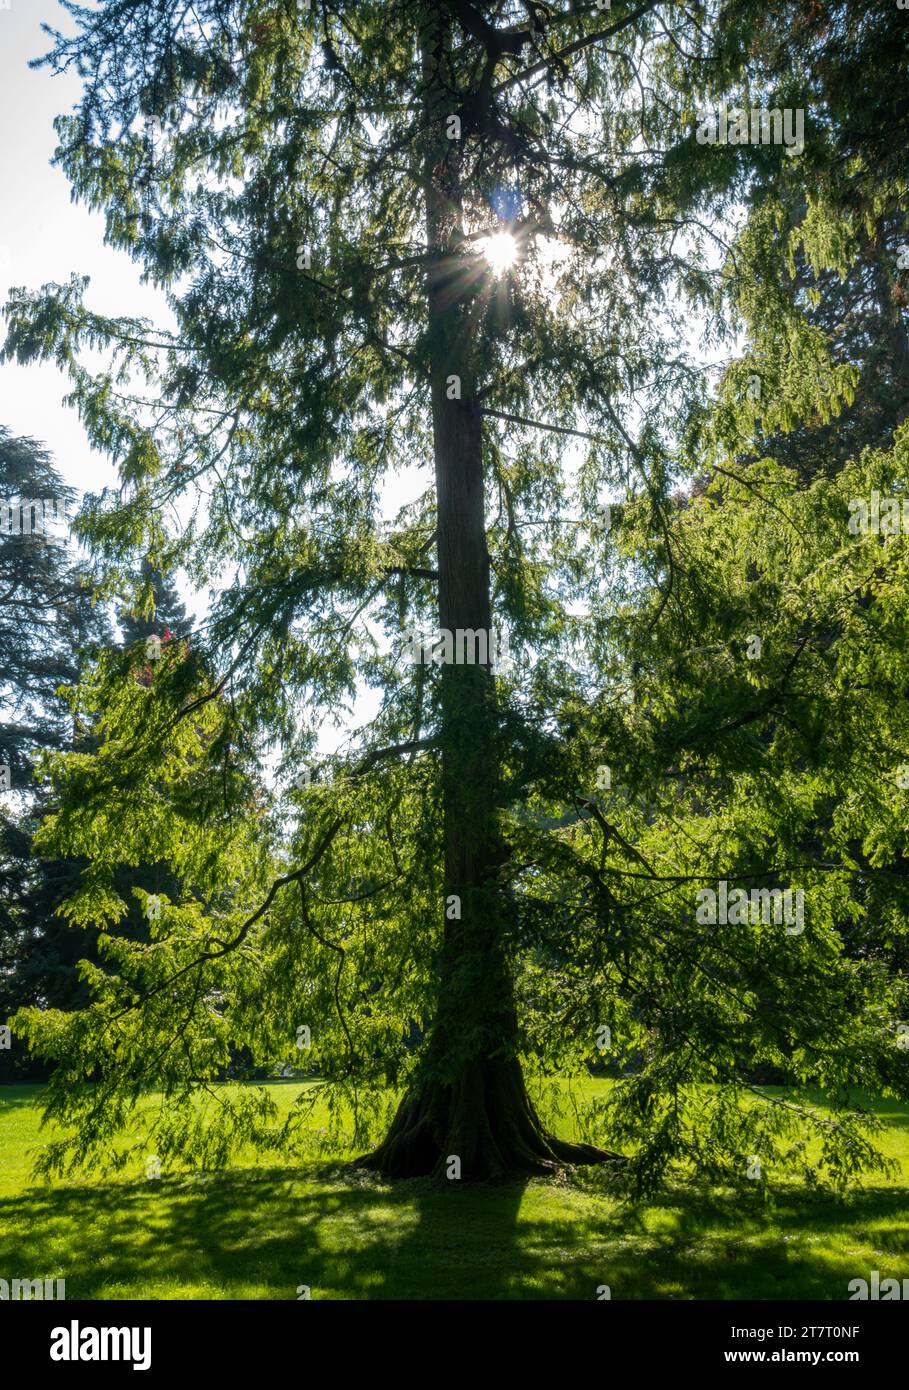 Arboretum, tree collection in the park on the island of Mainau, Lake Constance, Baden-Württemberg, Germany, Europe Stock Photo